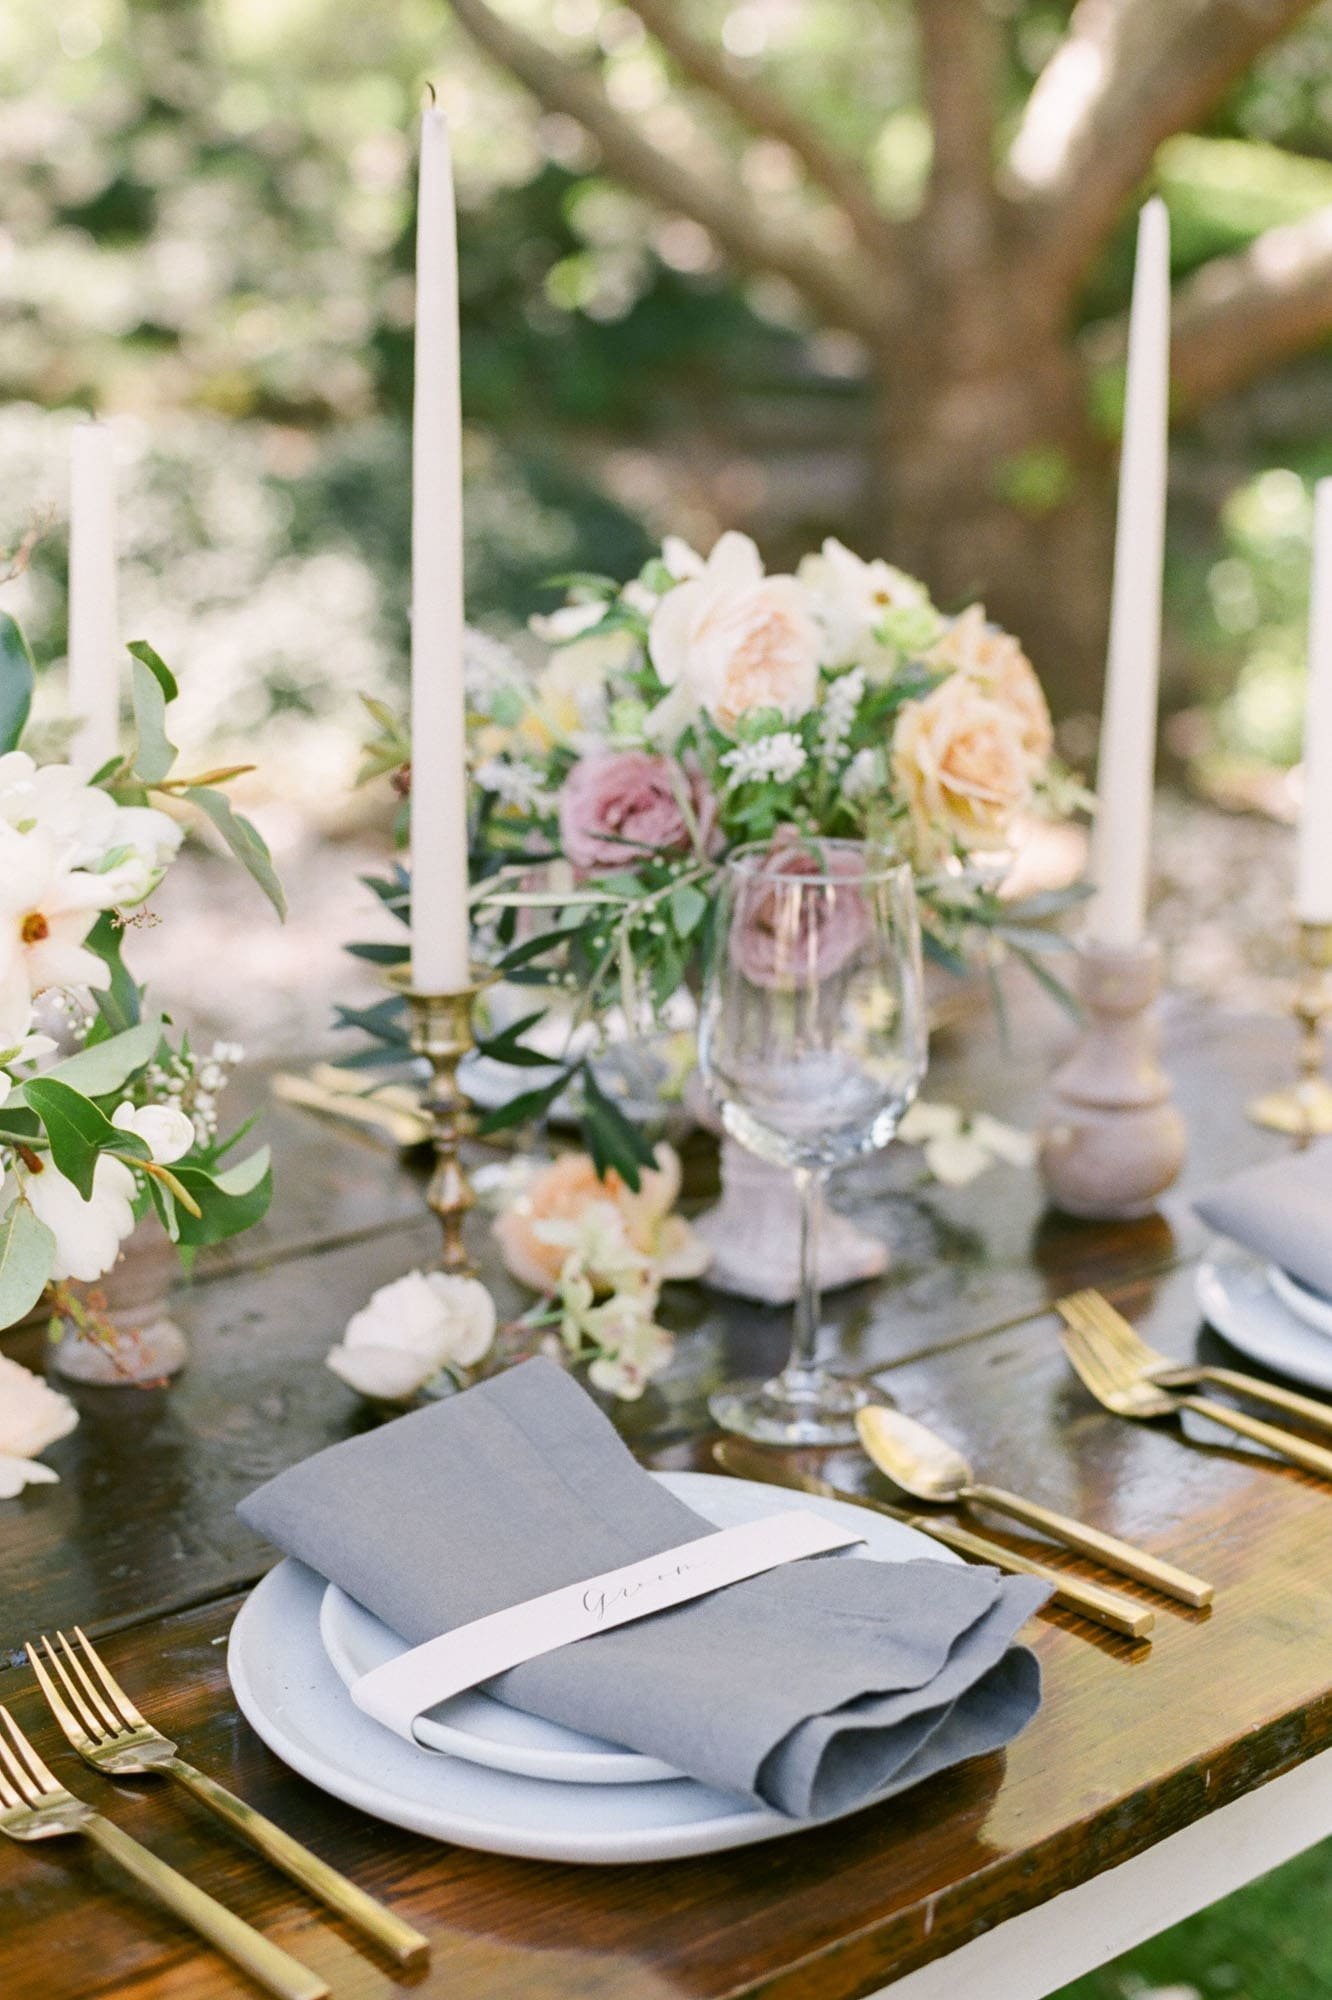 Styled tablescape at Columbia River Gorge wedding